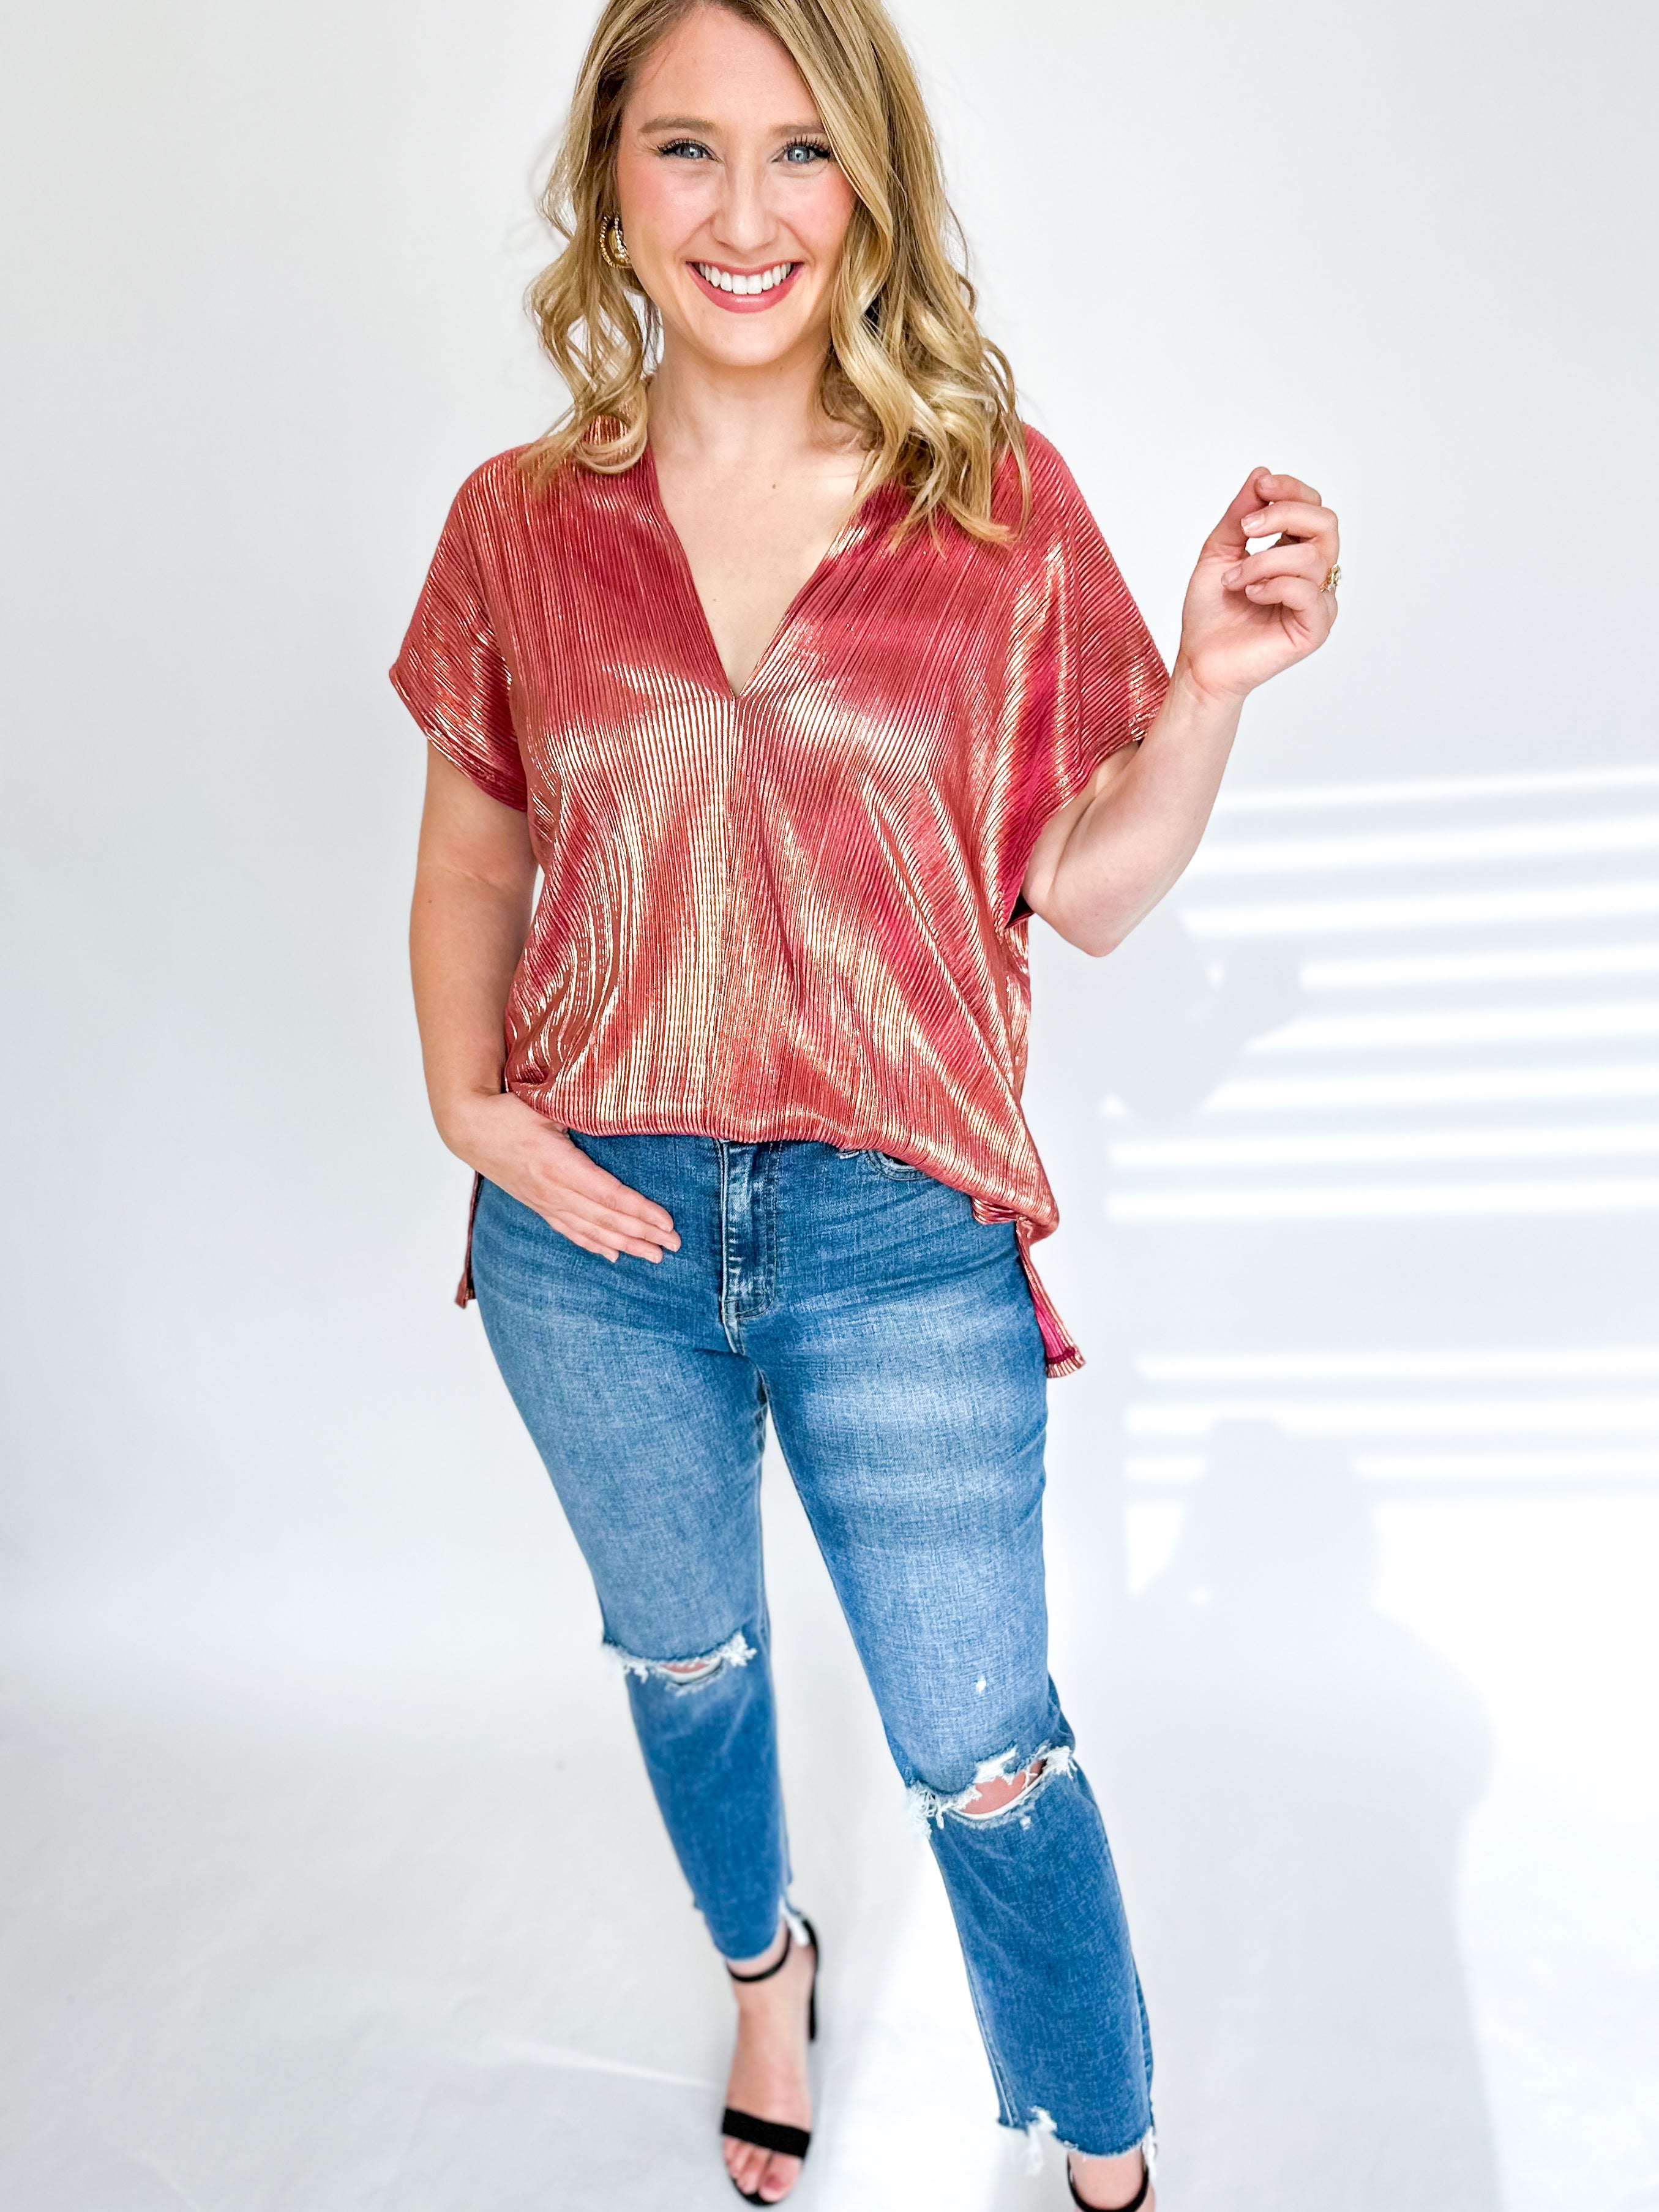 Rosey Glam Blouse-200 Fashion Blouses-ADRIENNE-July & June Women's Fashion Boutique Located in San Antonio, Texas